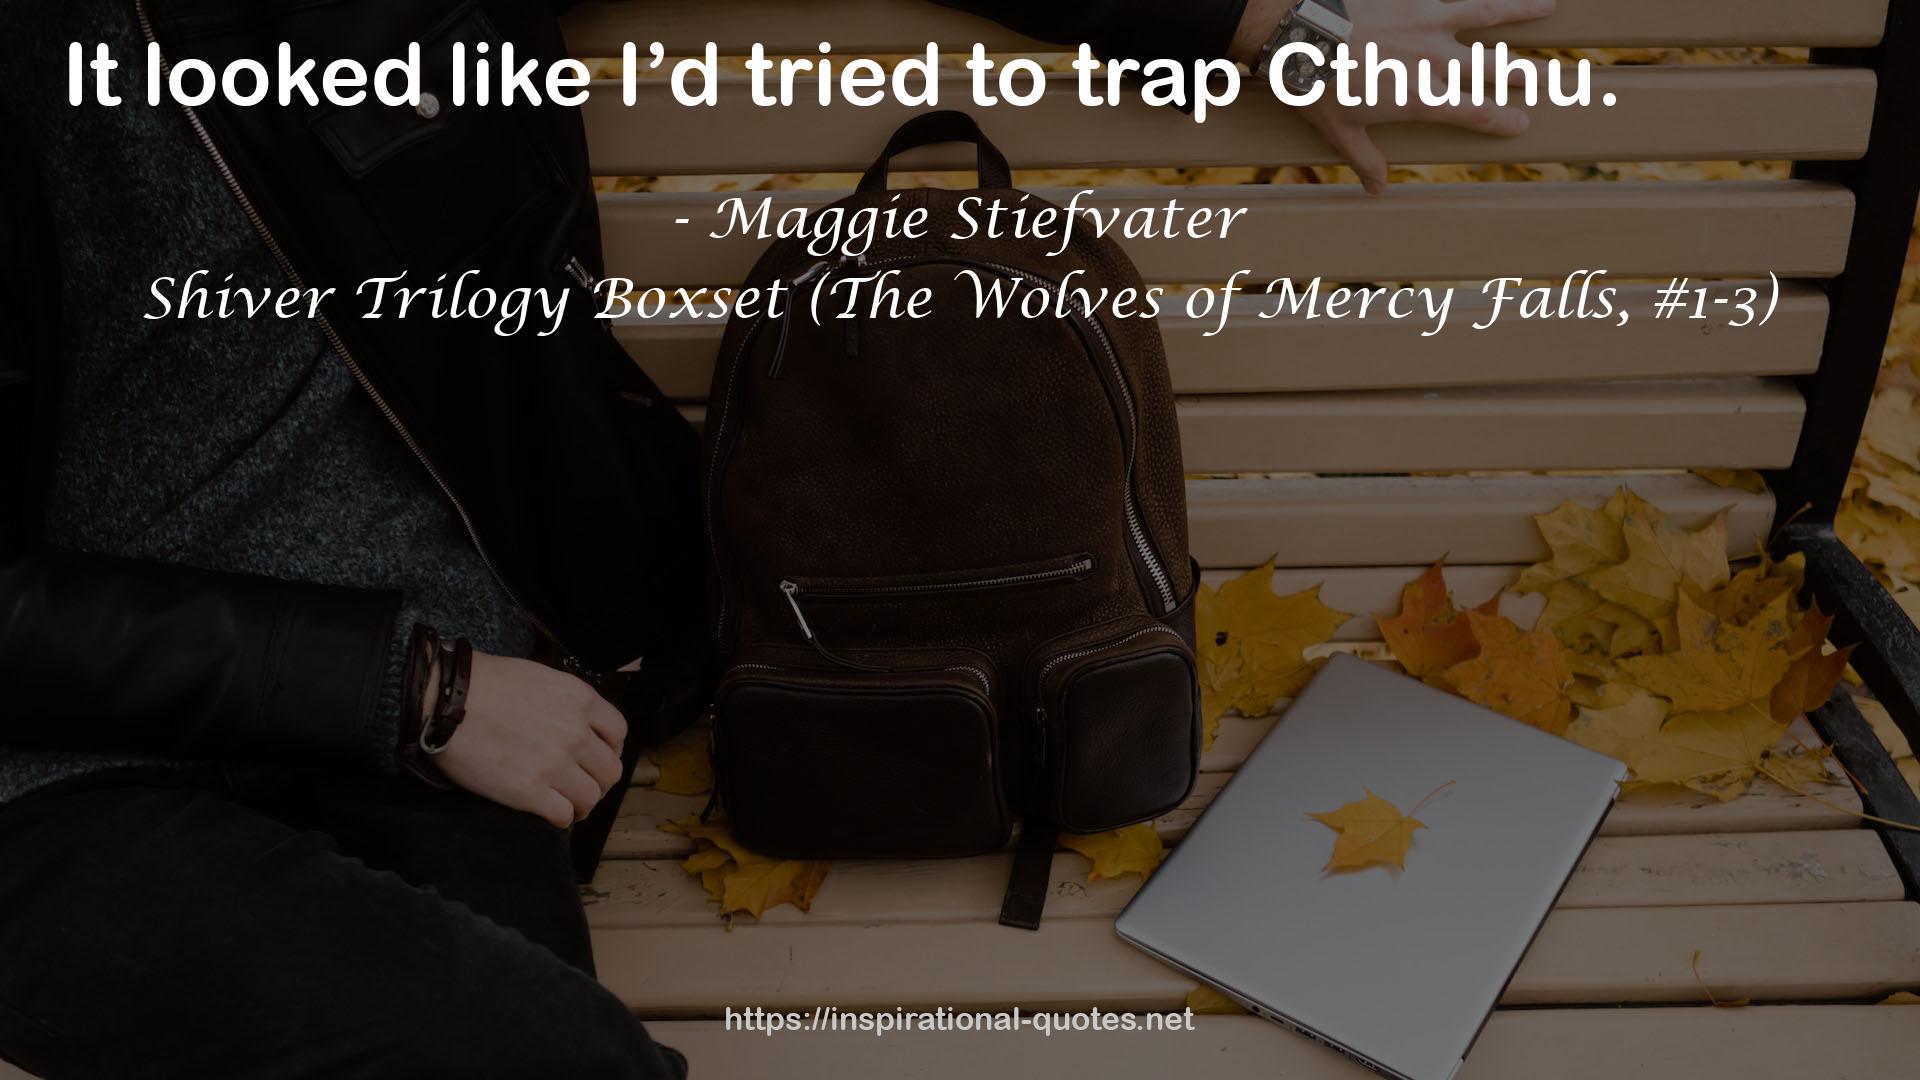 Shiver Trilogy Boxset (The Wolves of Mercy Falls, #1-3) QUOTES